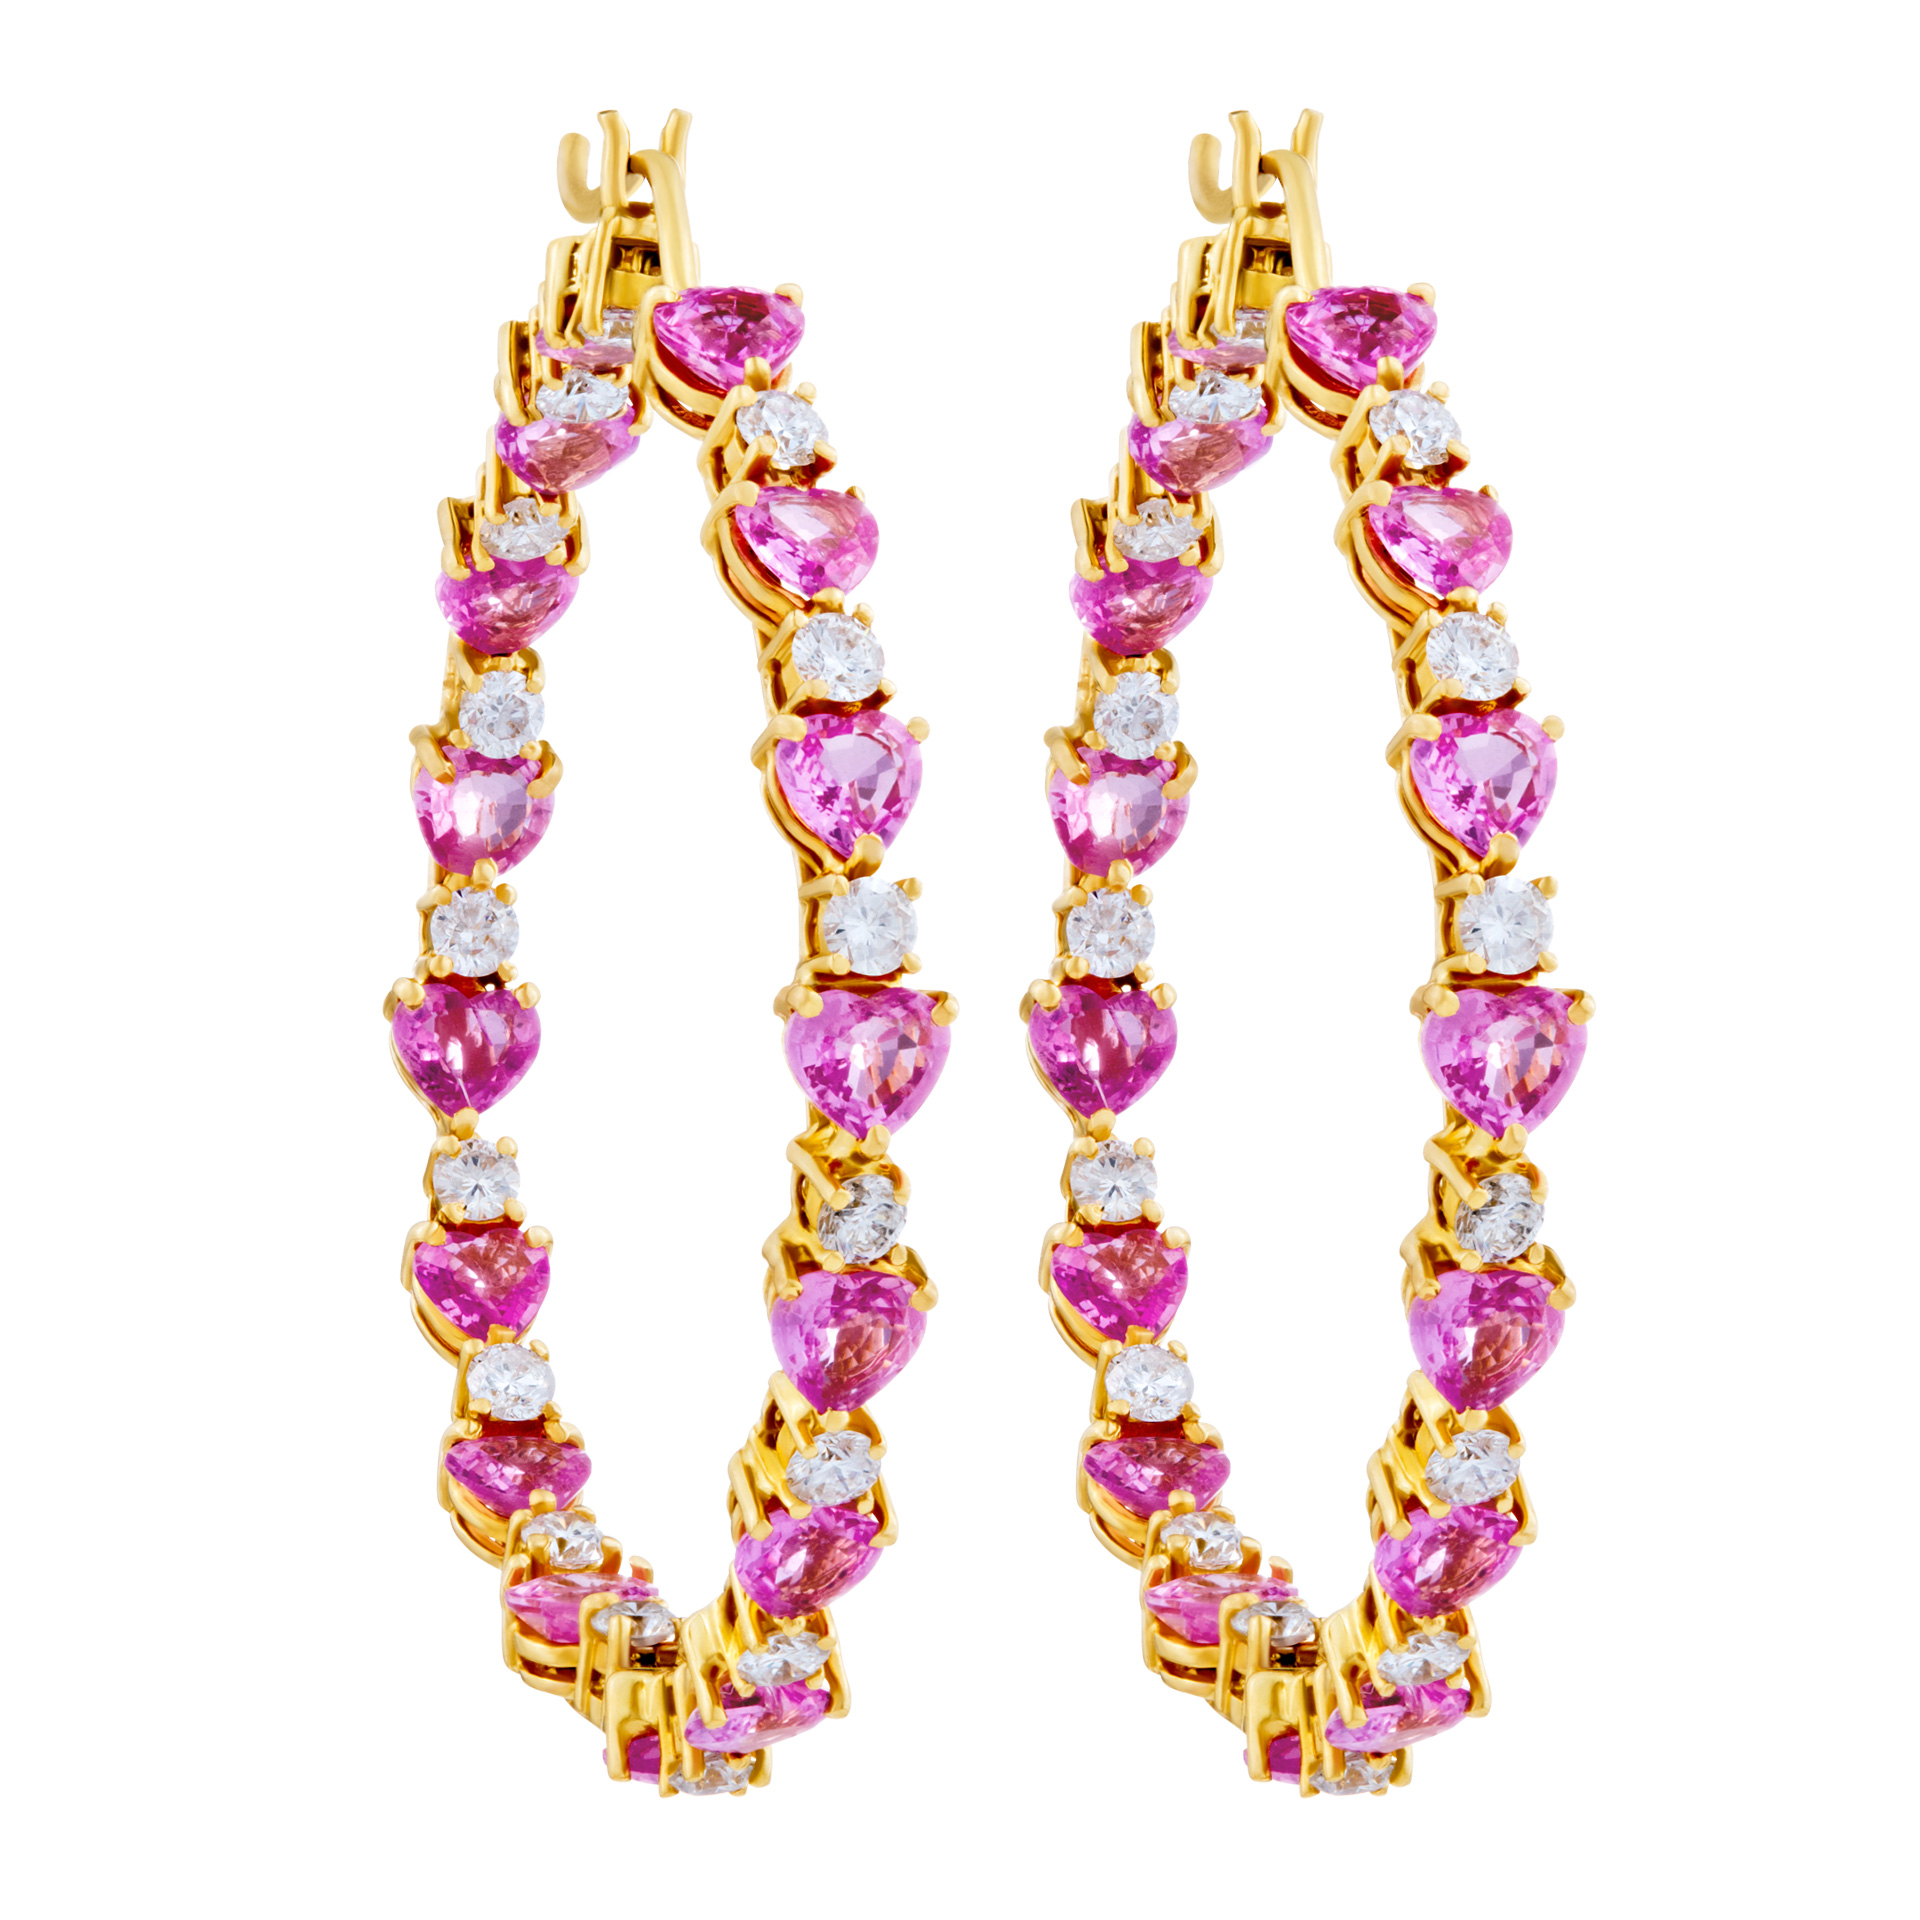 Pink sapphires and diamond  hoop earrings set in 18k yellow gold